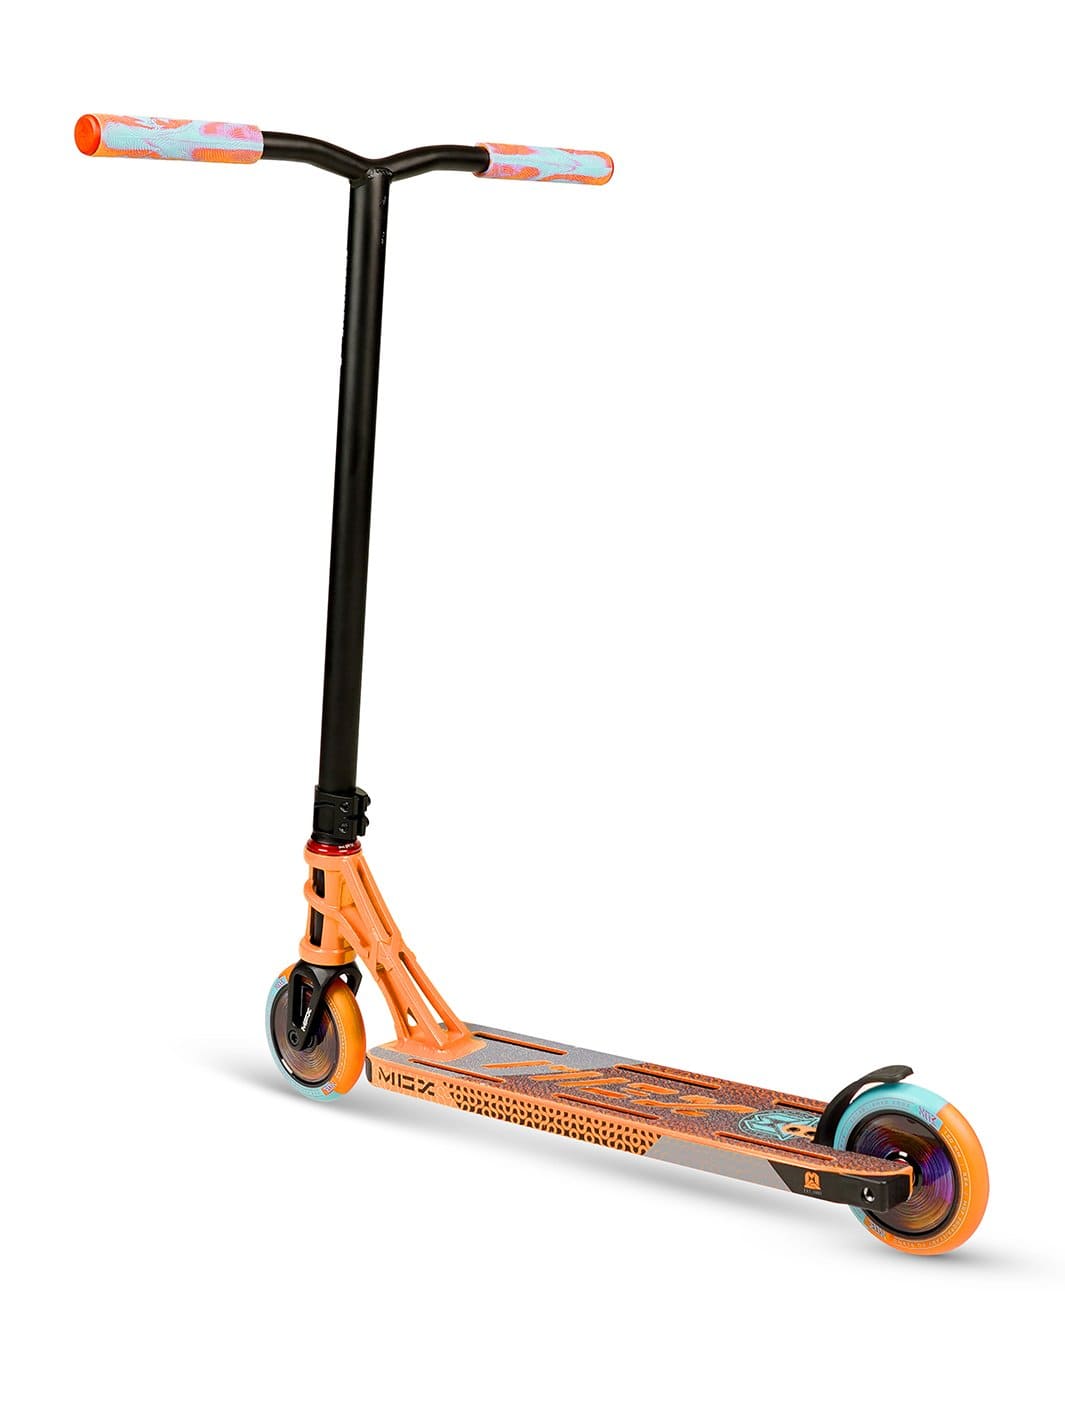 Madd Gear MGX P2 Complete Body-Powered Kick Stunt Scooter - Upzy.com